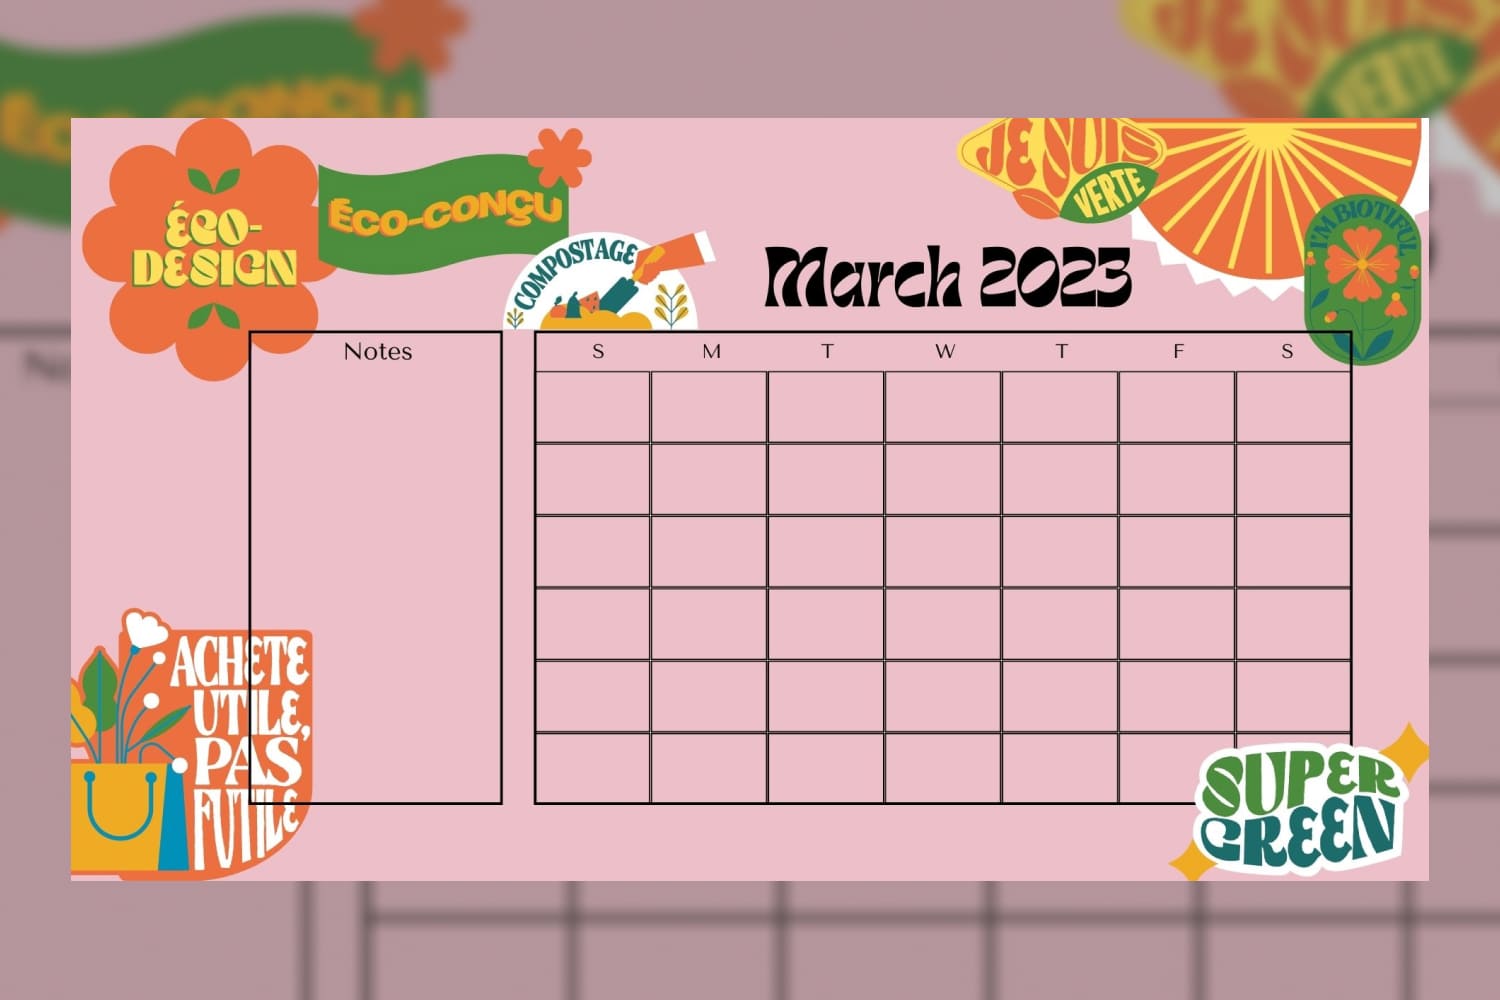 March 2023 calendar with whimsical design and pink and green illustrations.